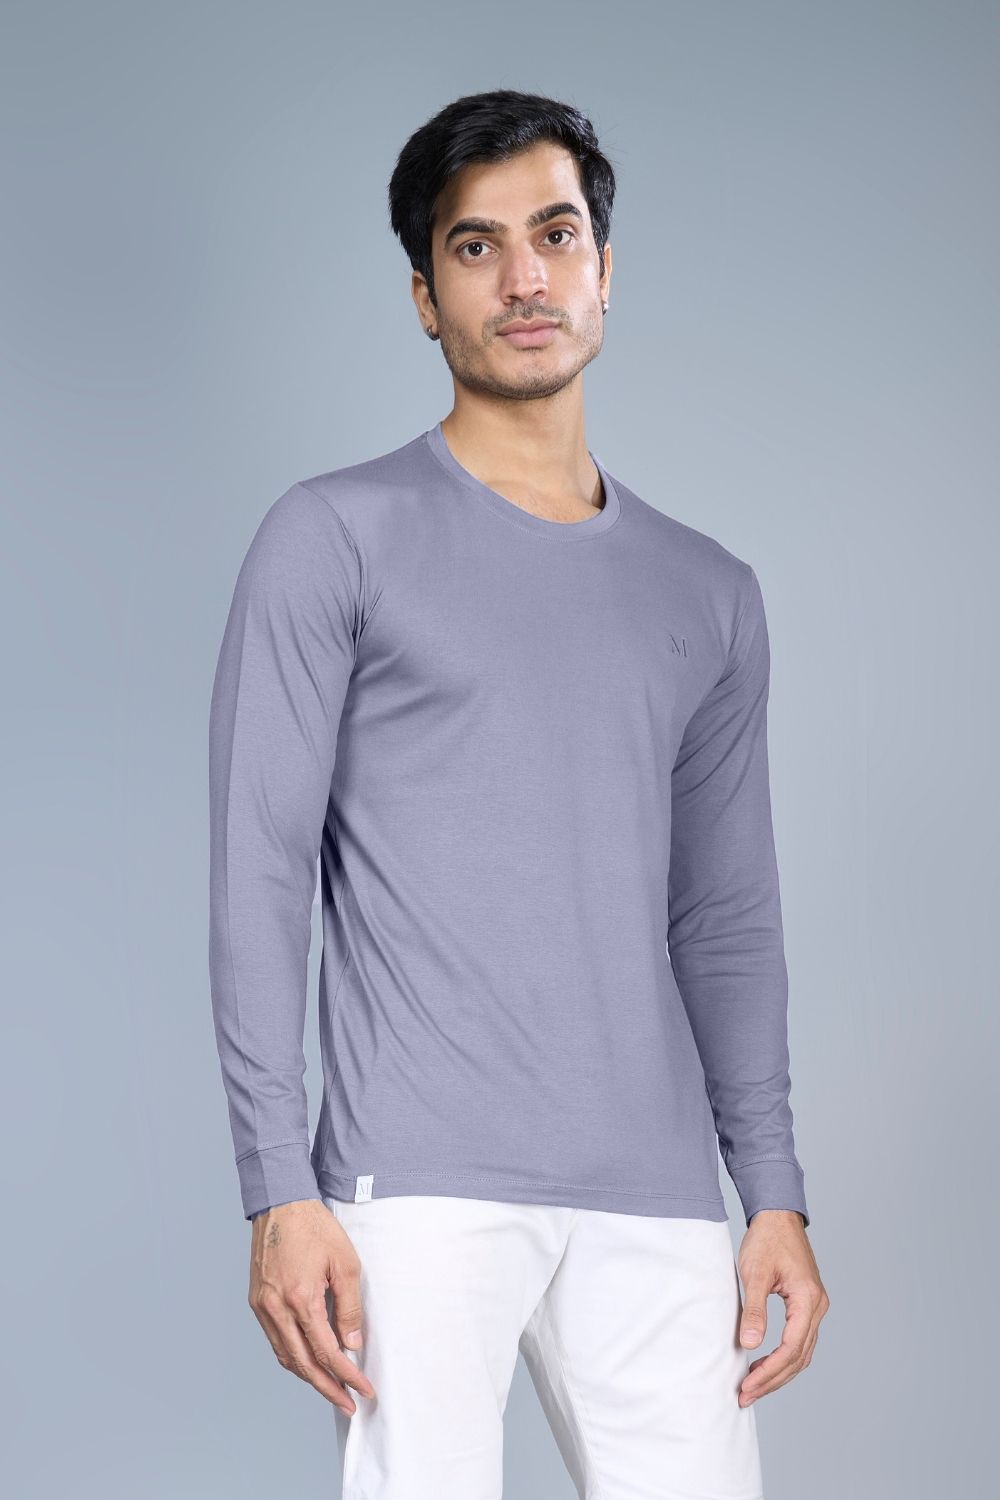 Vapor Blue colored, full sleeve solid T shirt for Men with round neck, front view.